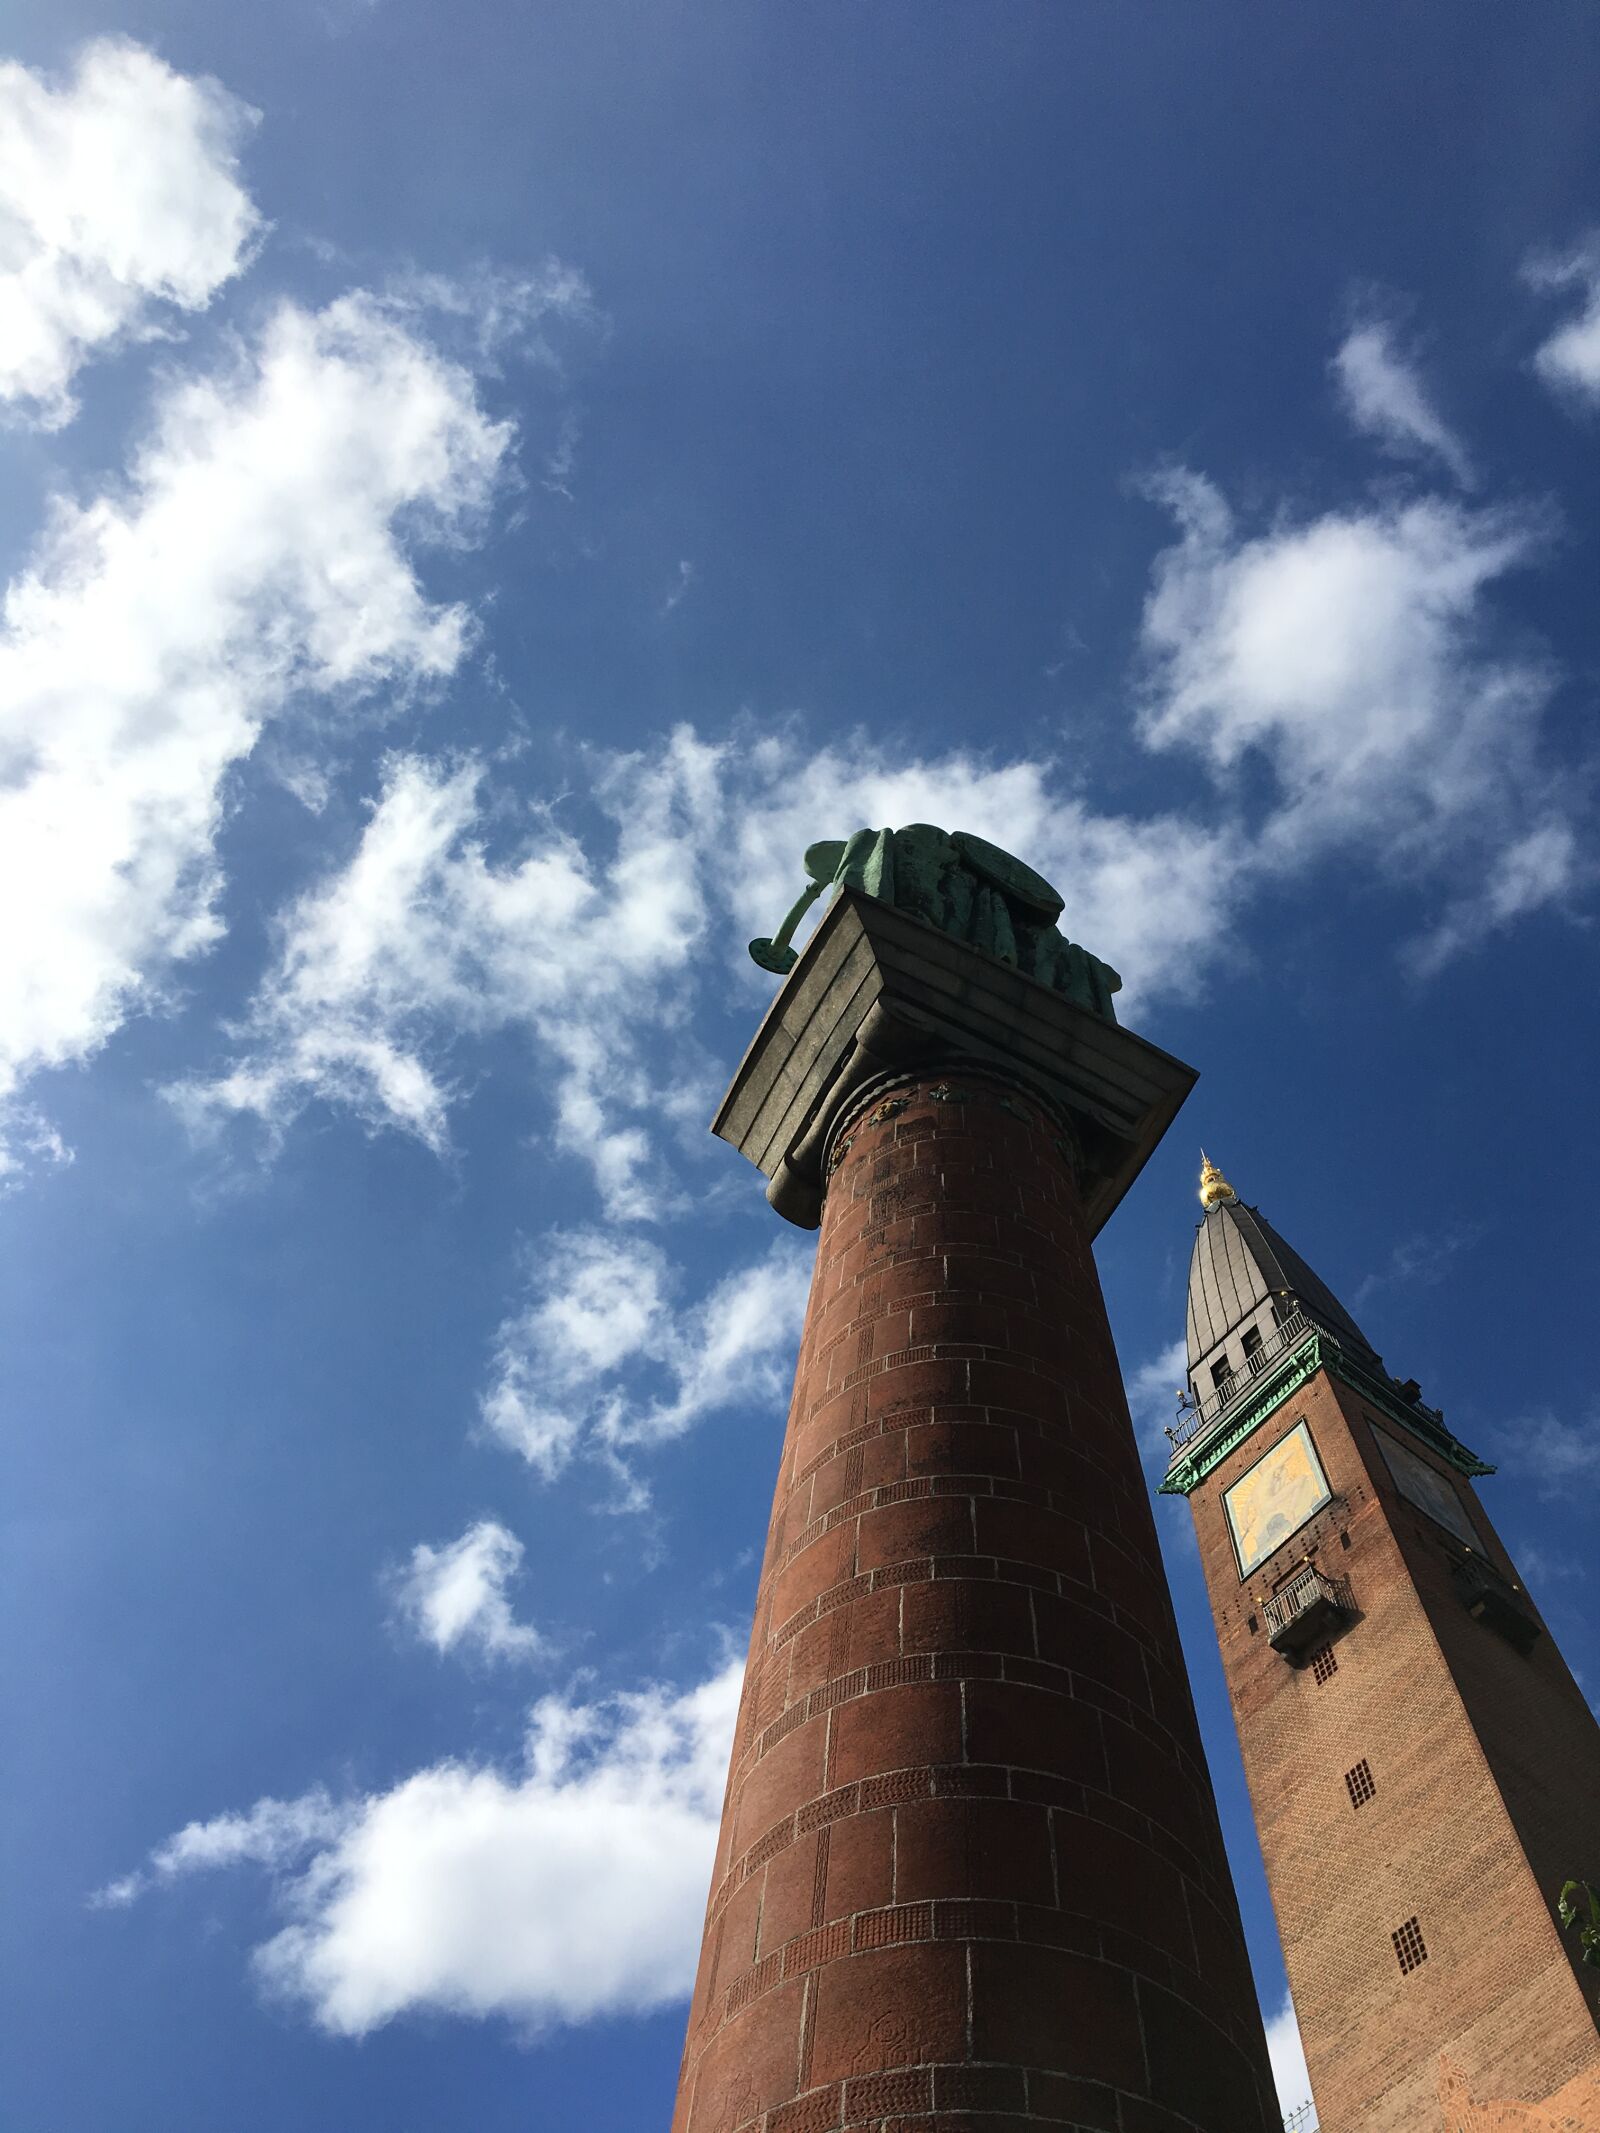 iPhone 6s back camera 4.15mm f/2.2 sample photo. Tower, sky, city photography